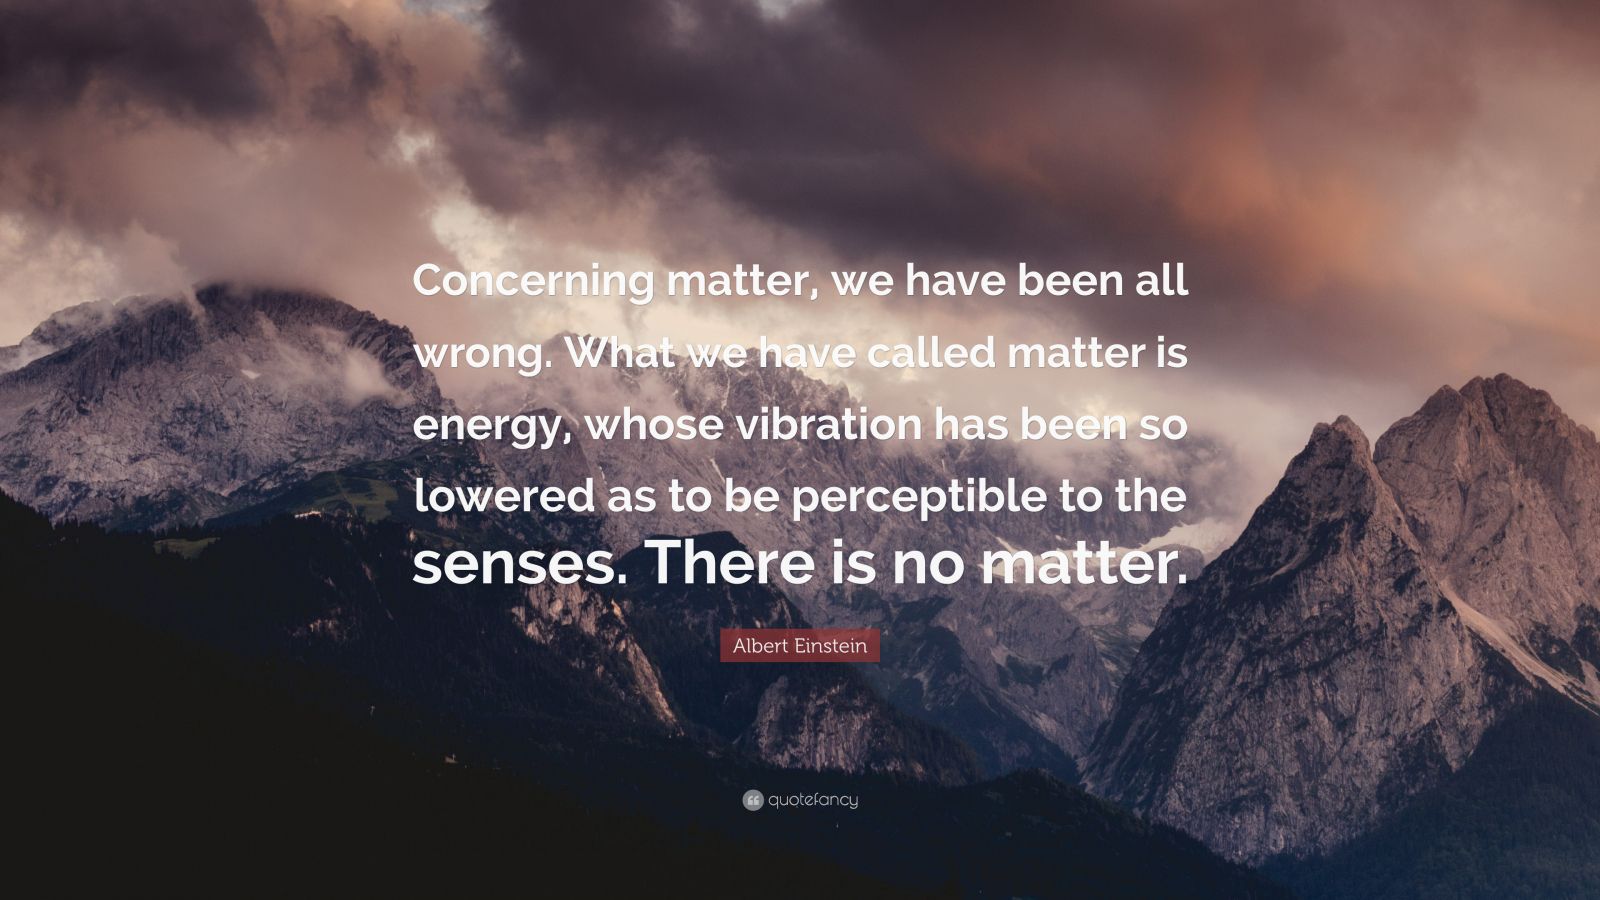 Albert Einstein Quote: “Concerning matter, we have been all wrong. What